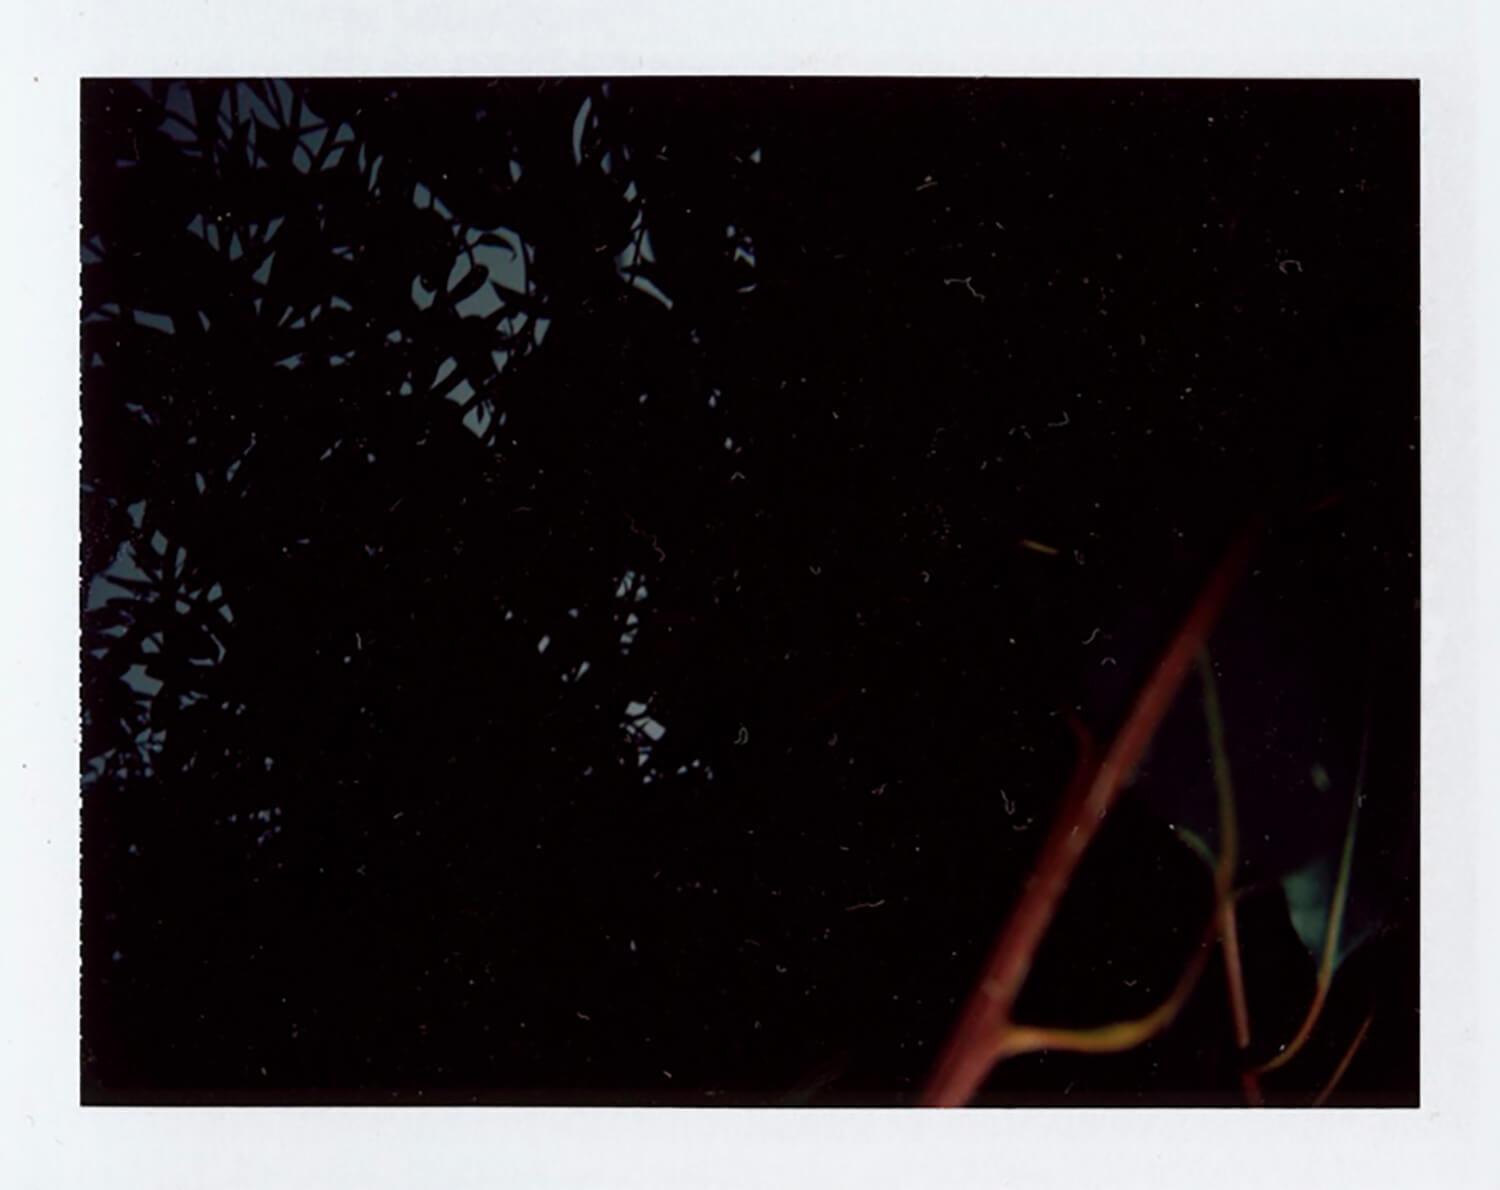  I.D.086, The Polaroid Revolutionary Workers, 2013, Polaroid Picture, 107mm x 86mm 